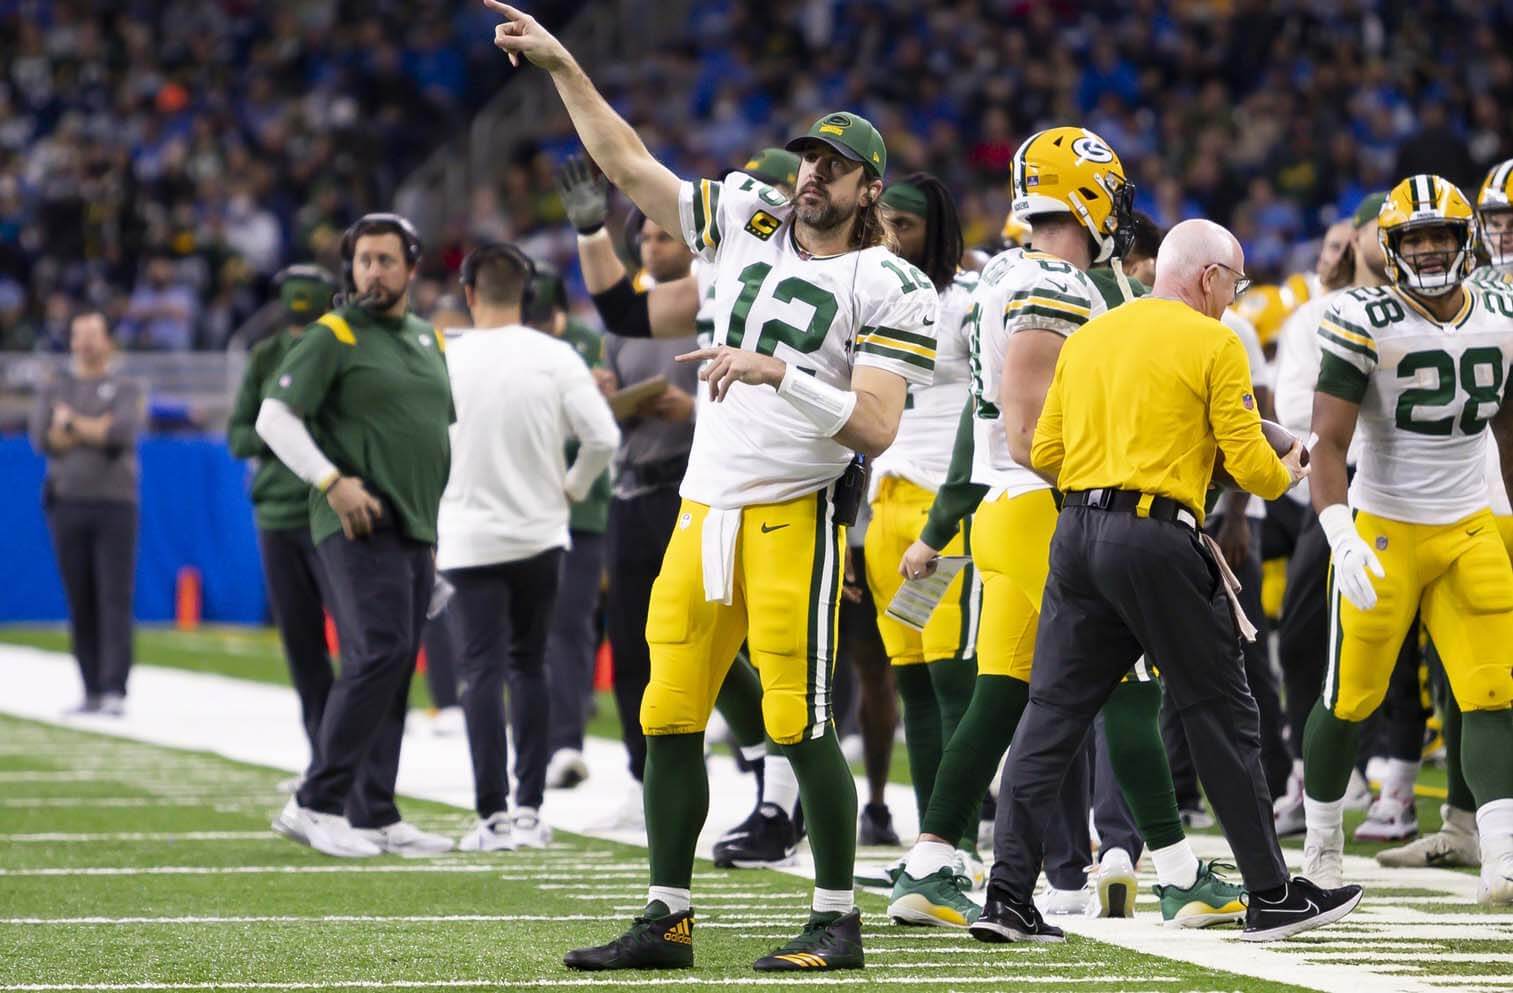 Green Bay Packers quarterback Aaron Rodgers (12) points to the other side of the field during the fourth quarter against the Detroit Lions at Ford Field.